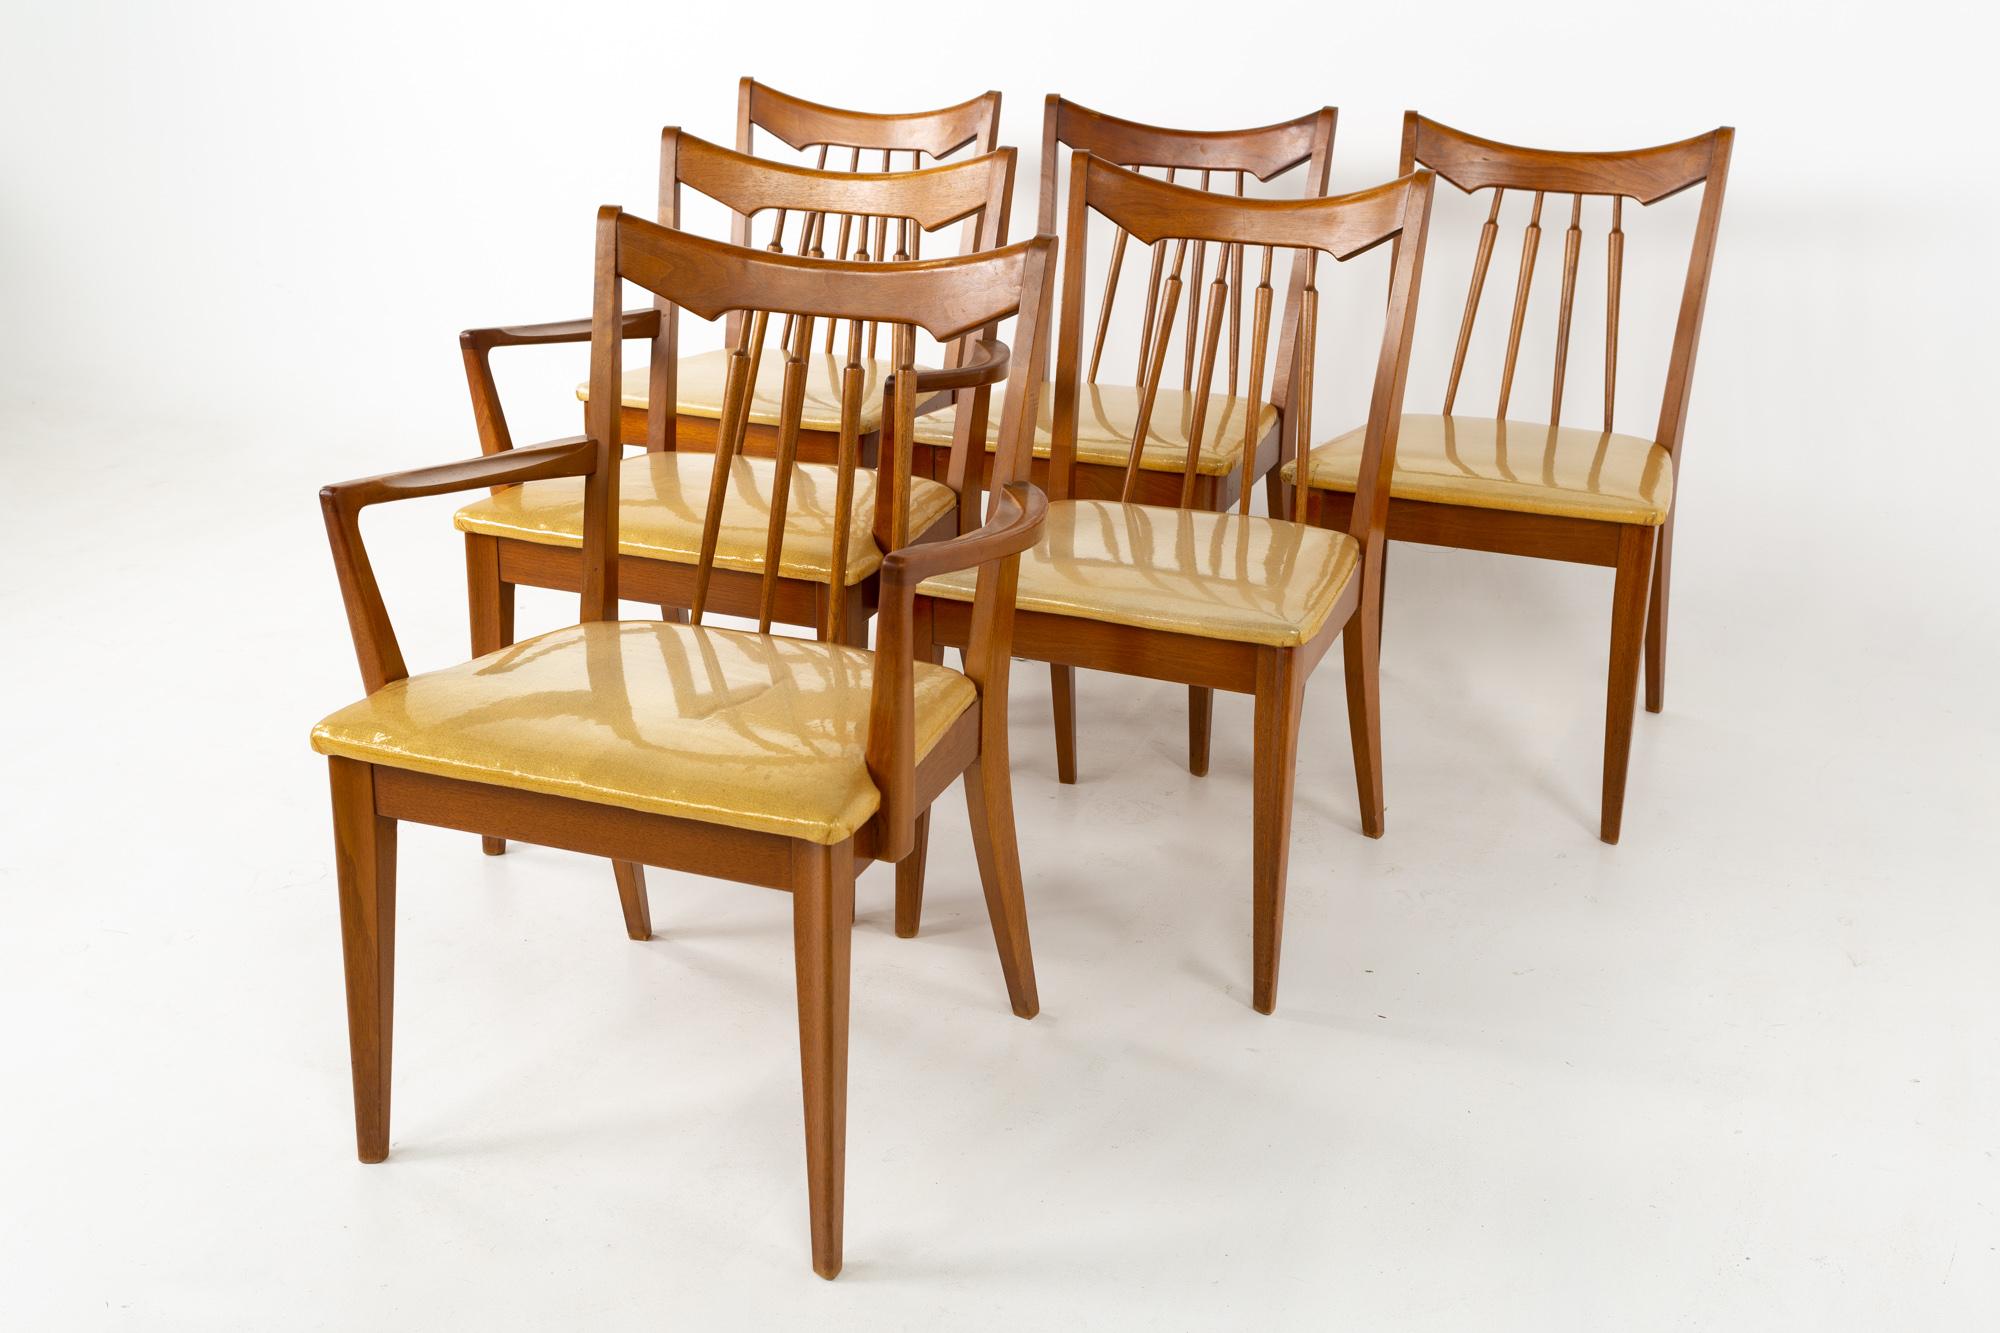 Mid century walnut dining chairs - set of 6
These chairs are 24 wide x 22.25 deep x 33 inches high, with a seat height of 17.75 and arm height of 25.25 inches 

All pieces of furniture can be had in what we call restored vintage condition. That